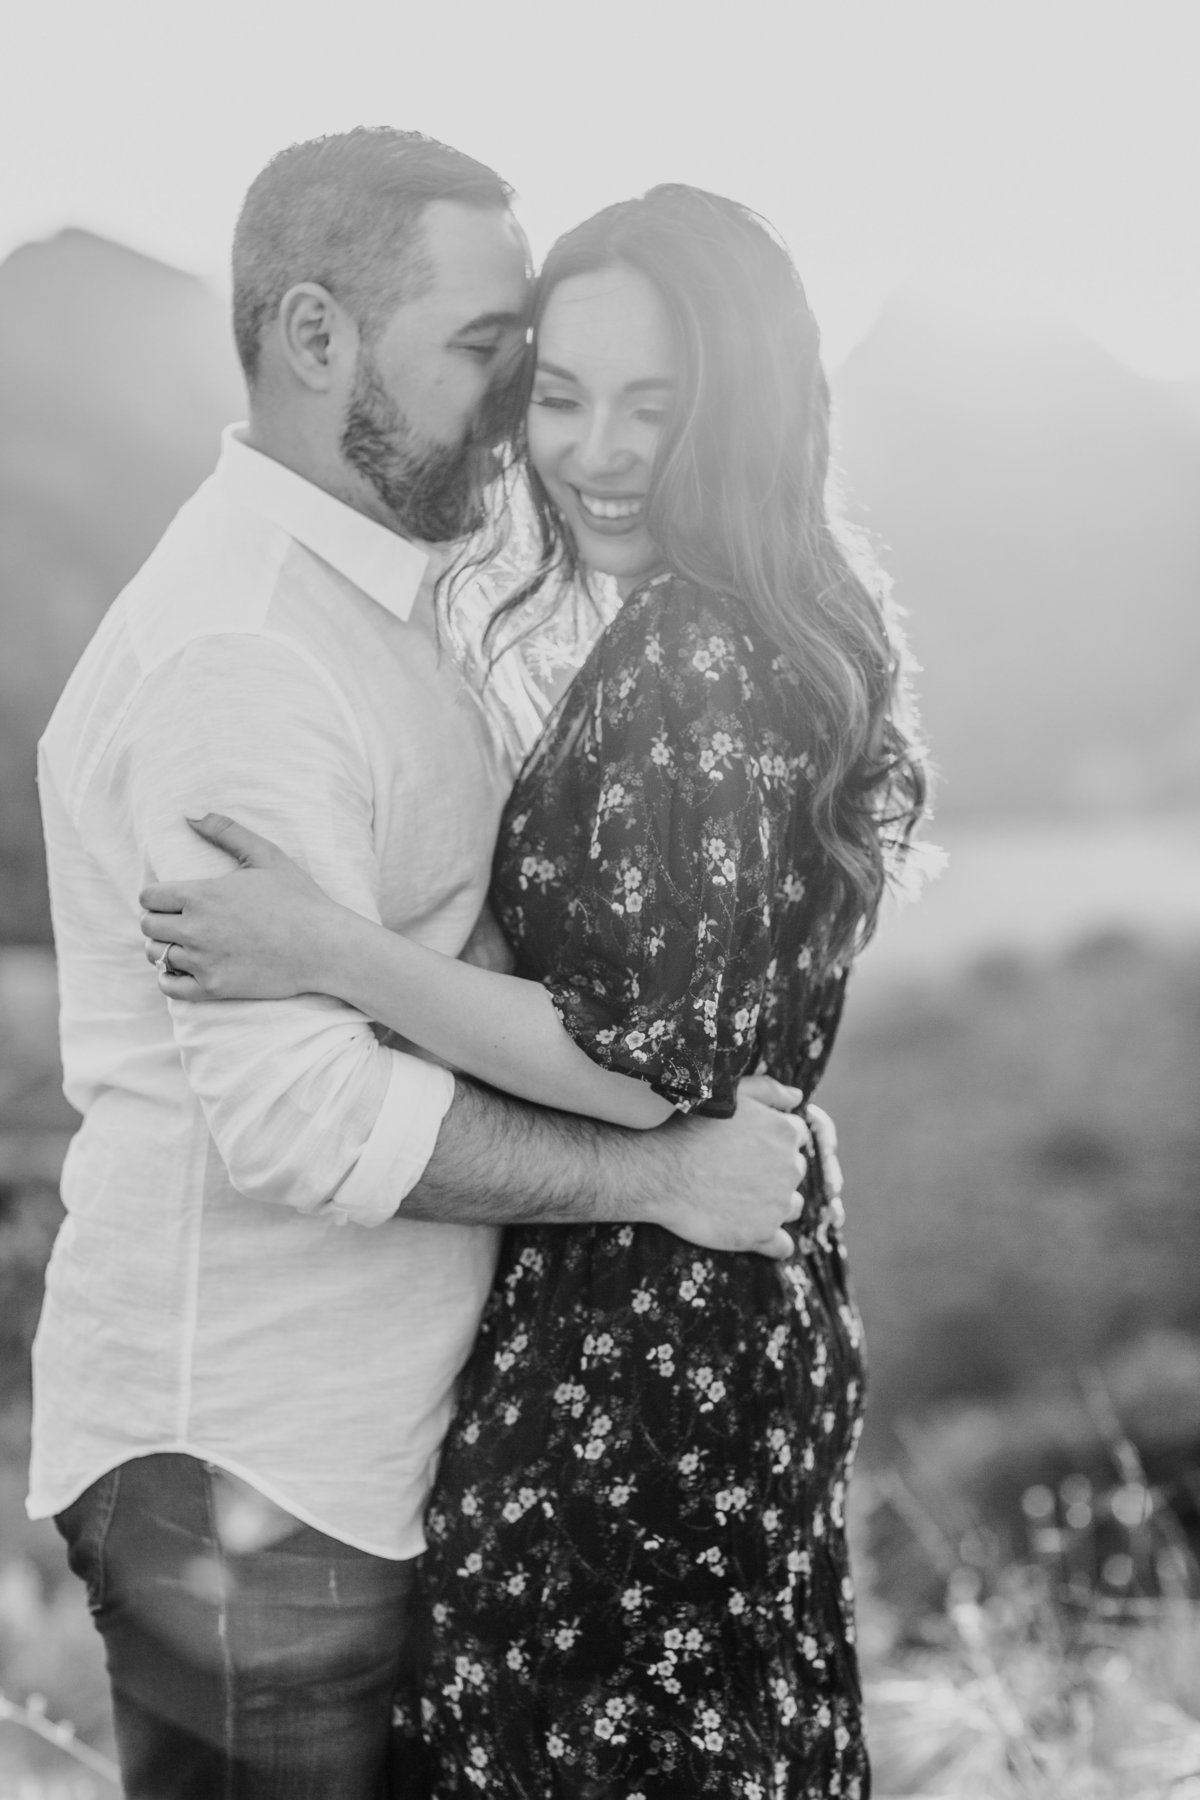 Malibu Creek State Park Engagement Session_Valorie Darling Photography-7667